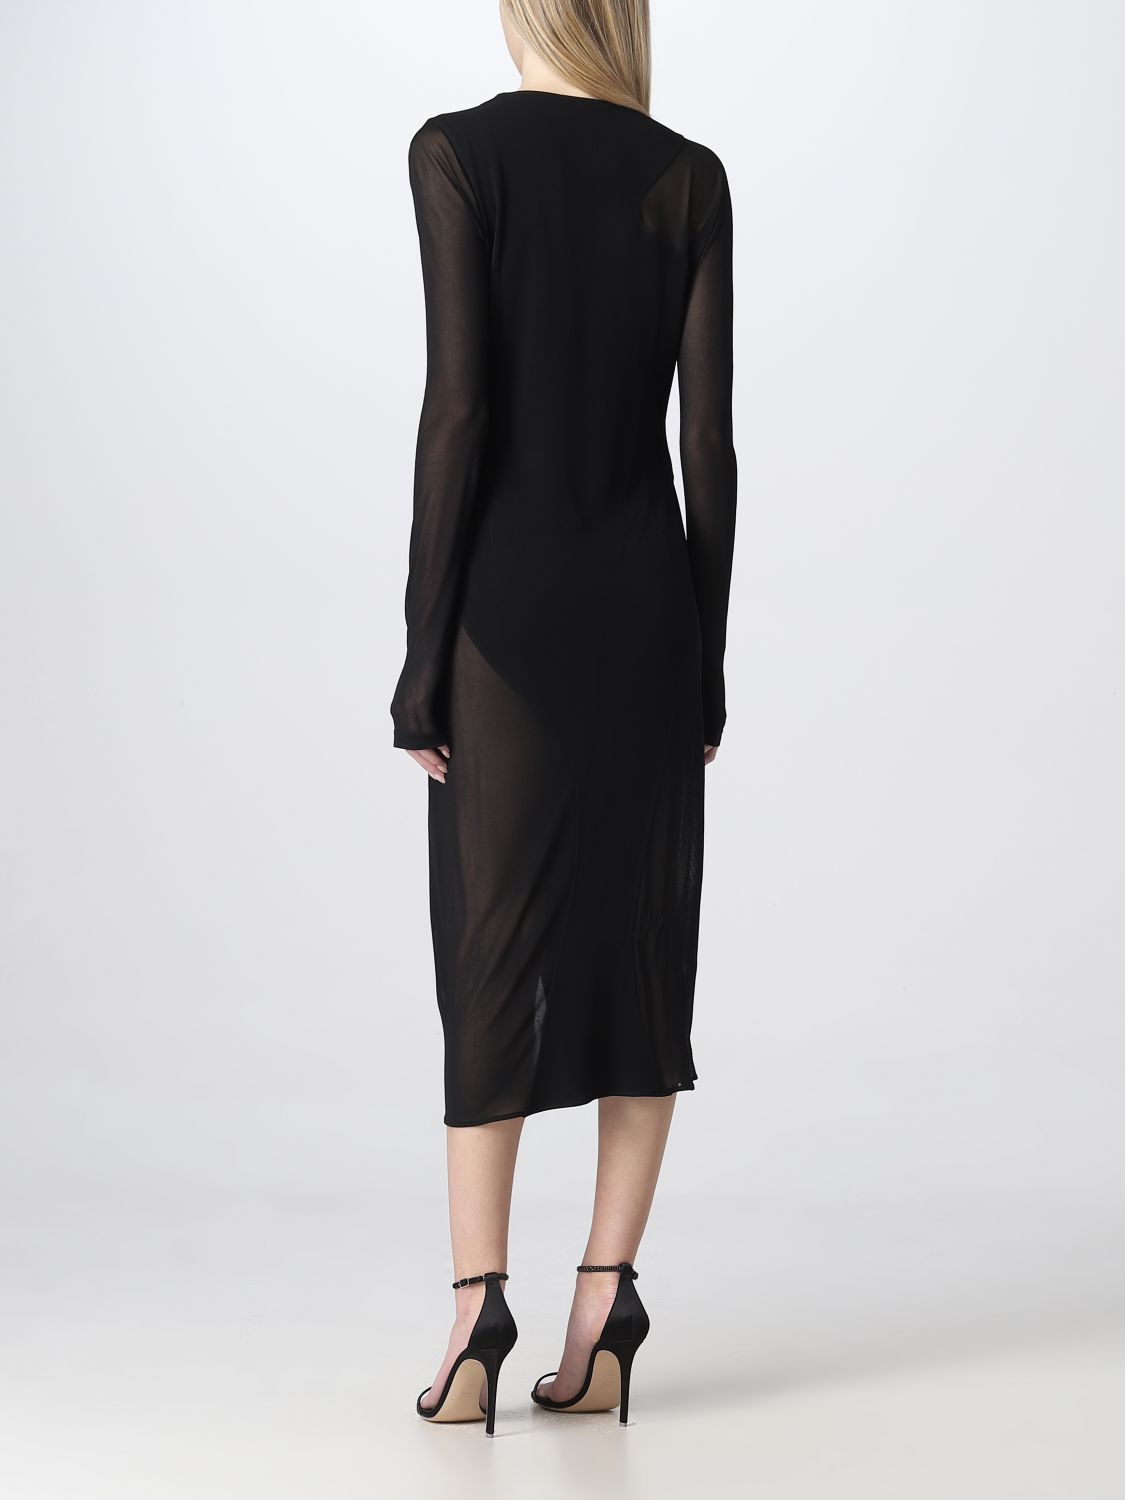 TOM FORD: dress for woman - Black | Tom Ford dress ABJ668FAX1008 online on  